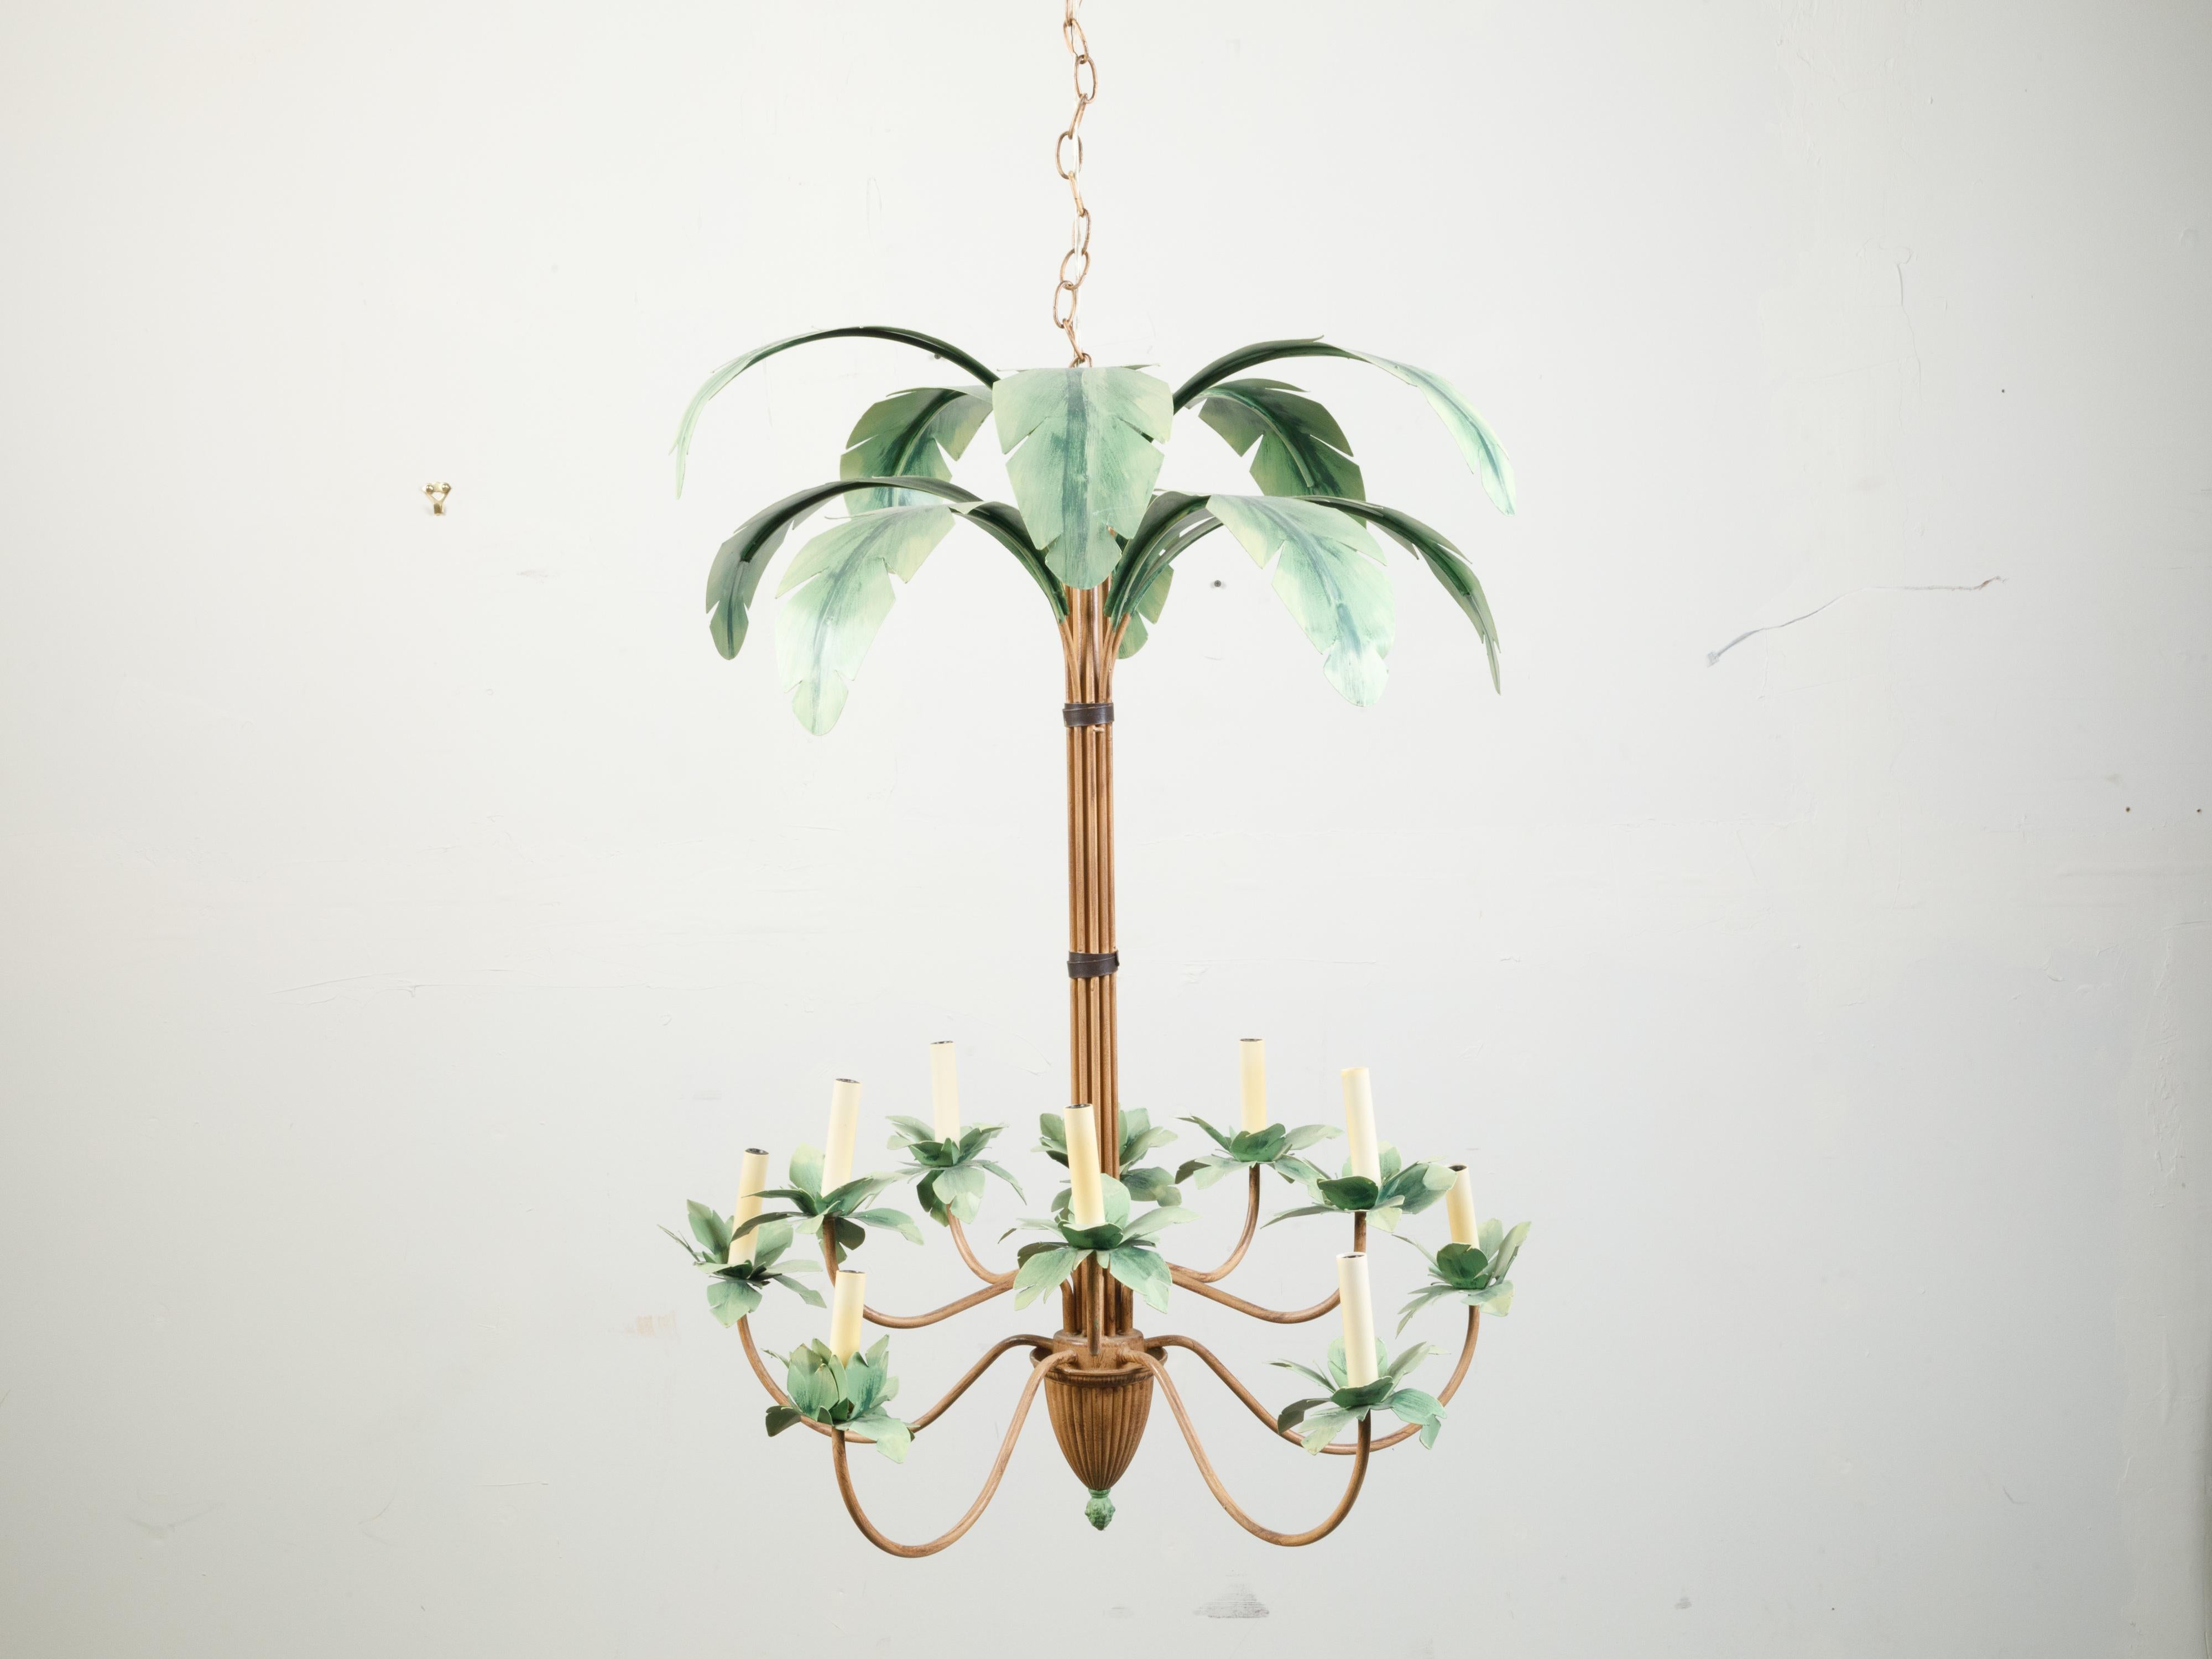 A vintage painted tôle palm tree light fixture from the mid 20th century, with 10 lights and swoop arms. Created during the midcentury period, this light fixture attracts our attention with its painted tôle palm tree silhouette supporting 10 swoop